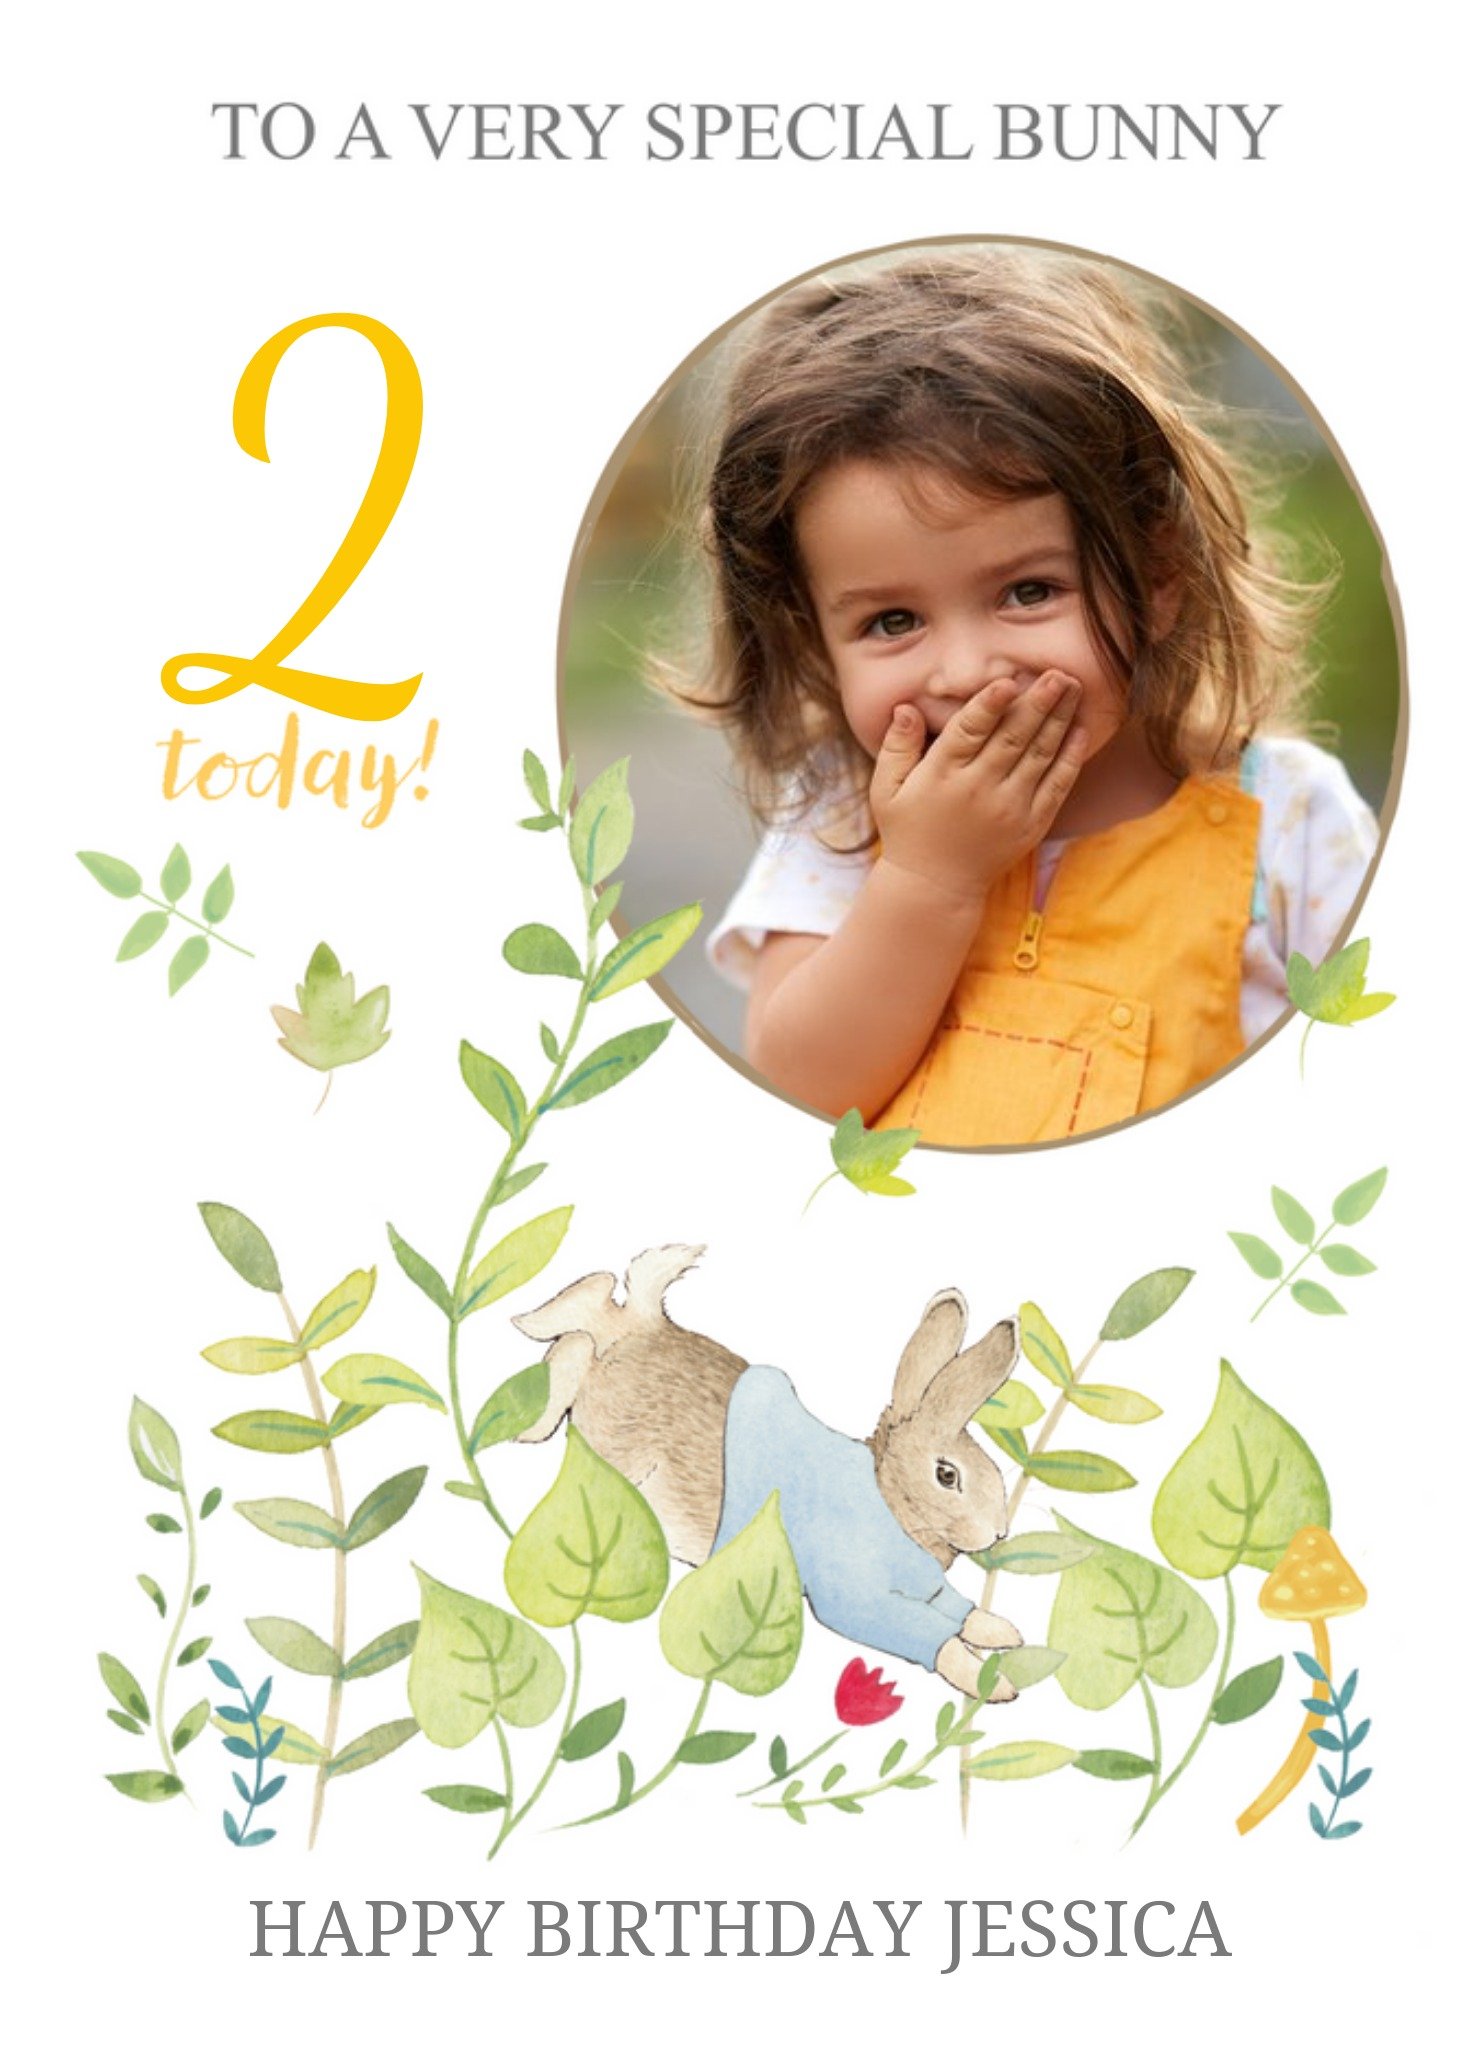 Peter Rabbit To A Very Special Bunny Photo Upload Birthday Card, Large